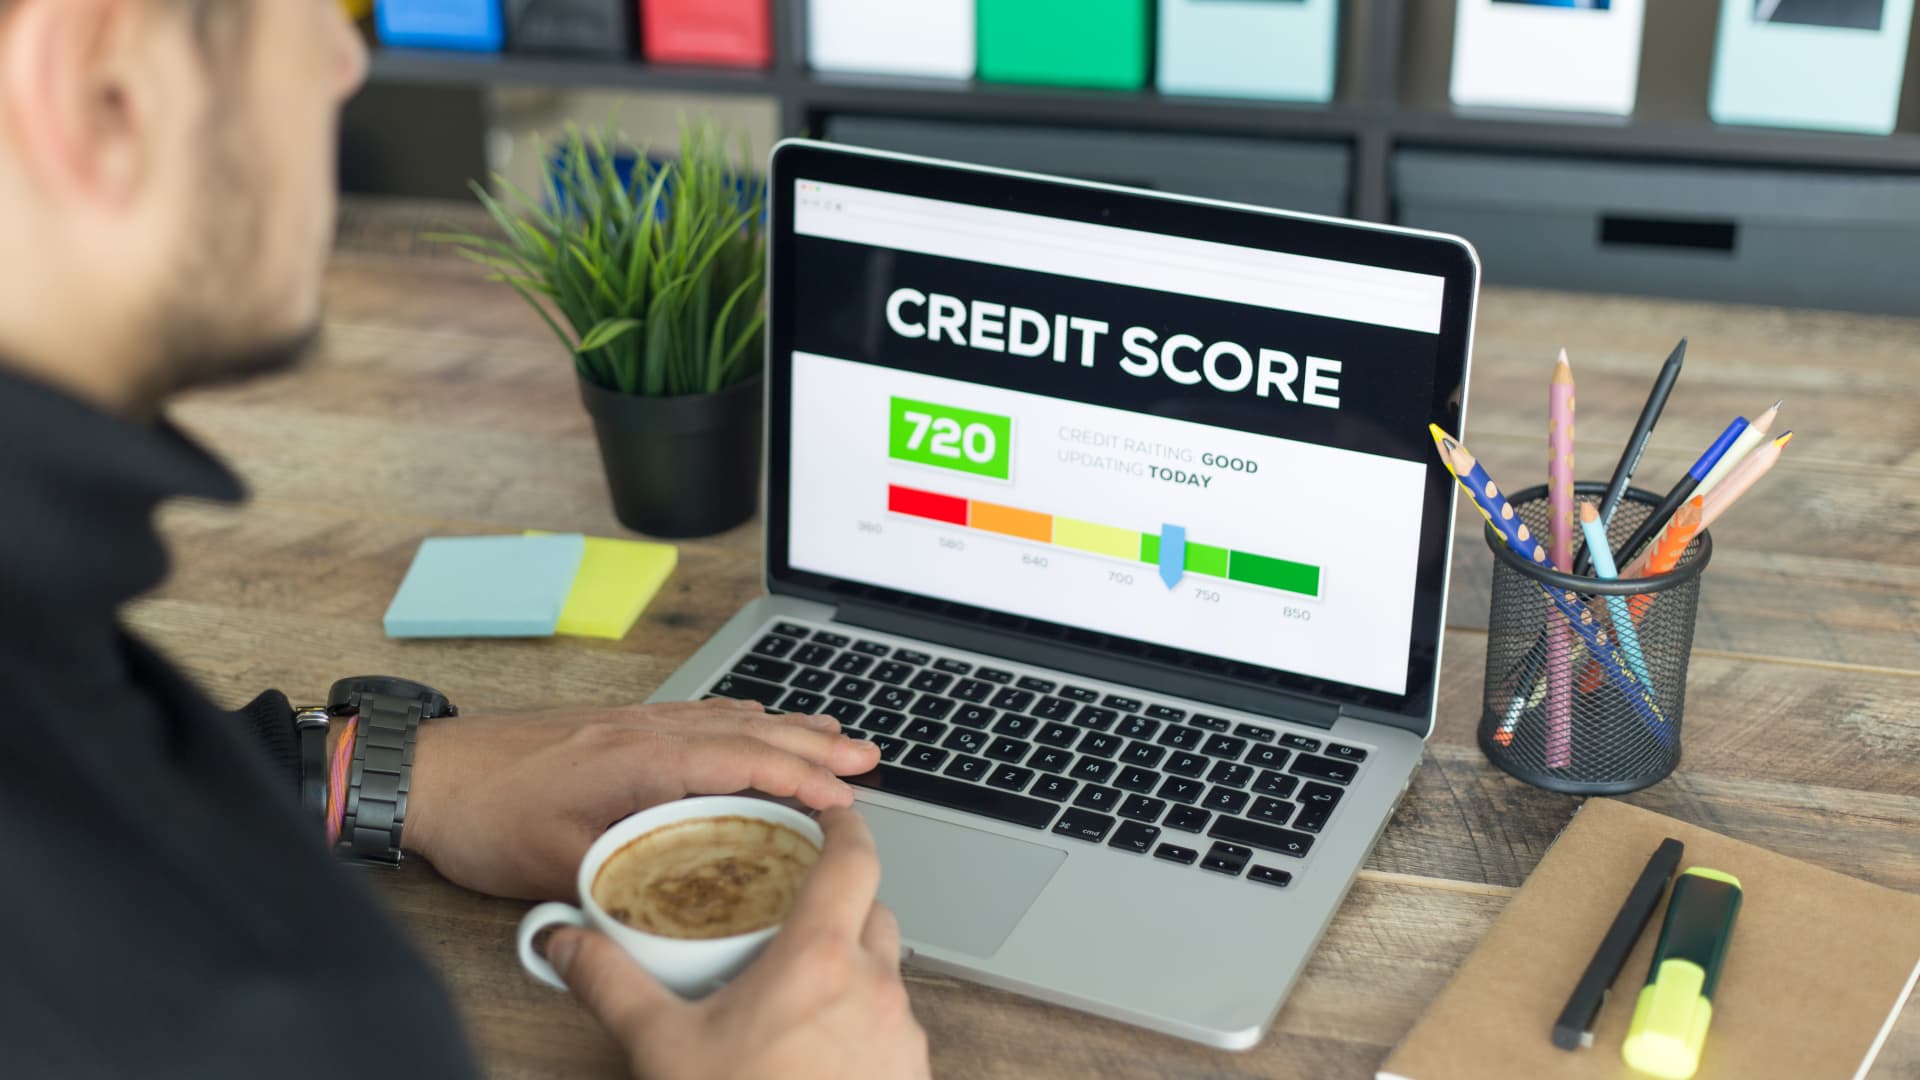 Is your credit score lowered when you check it?